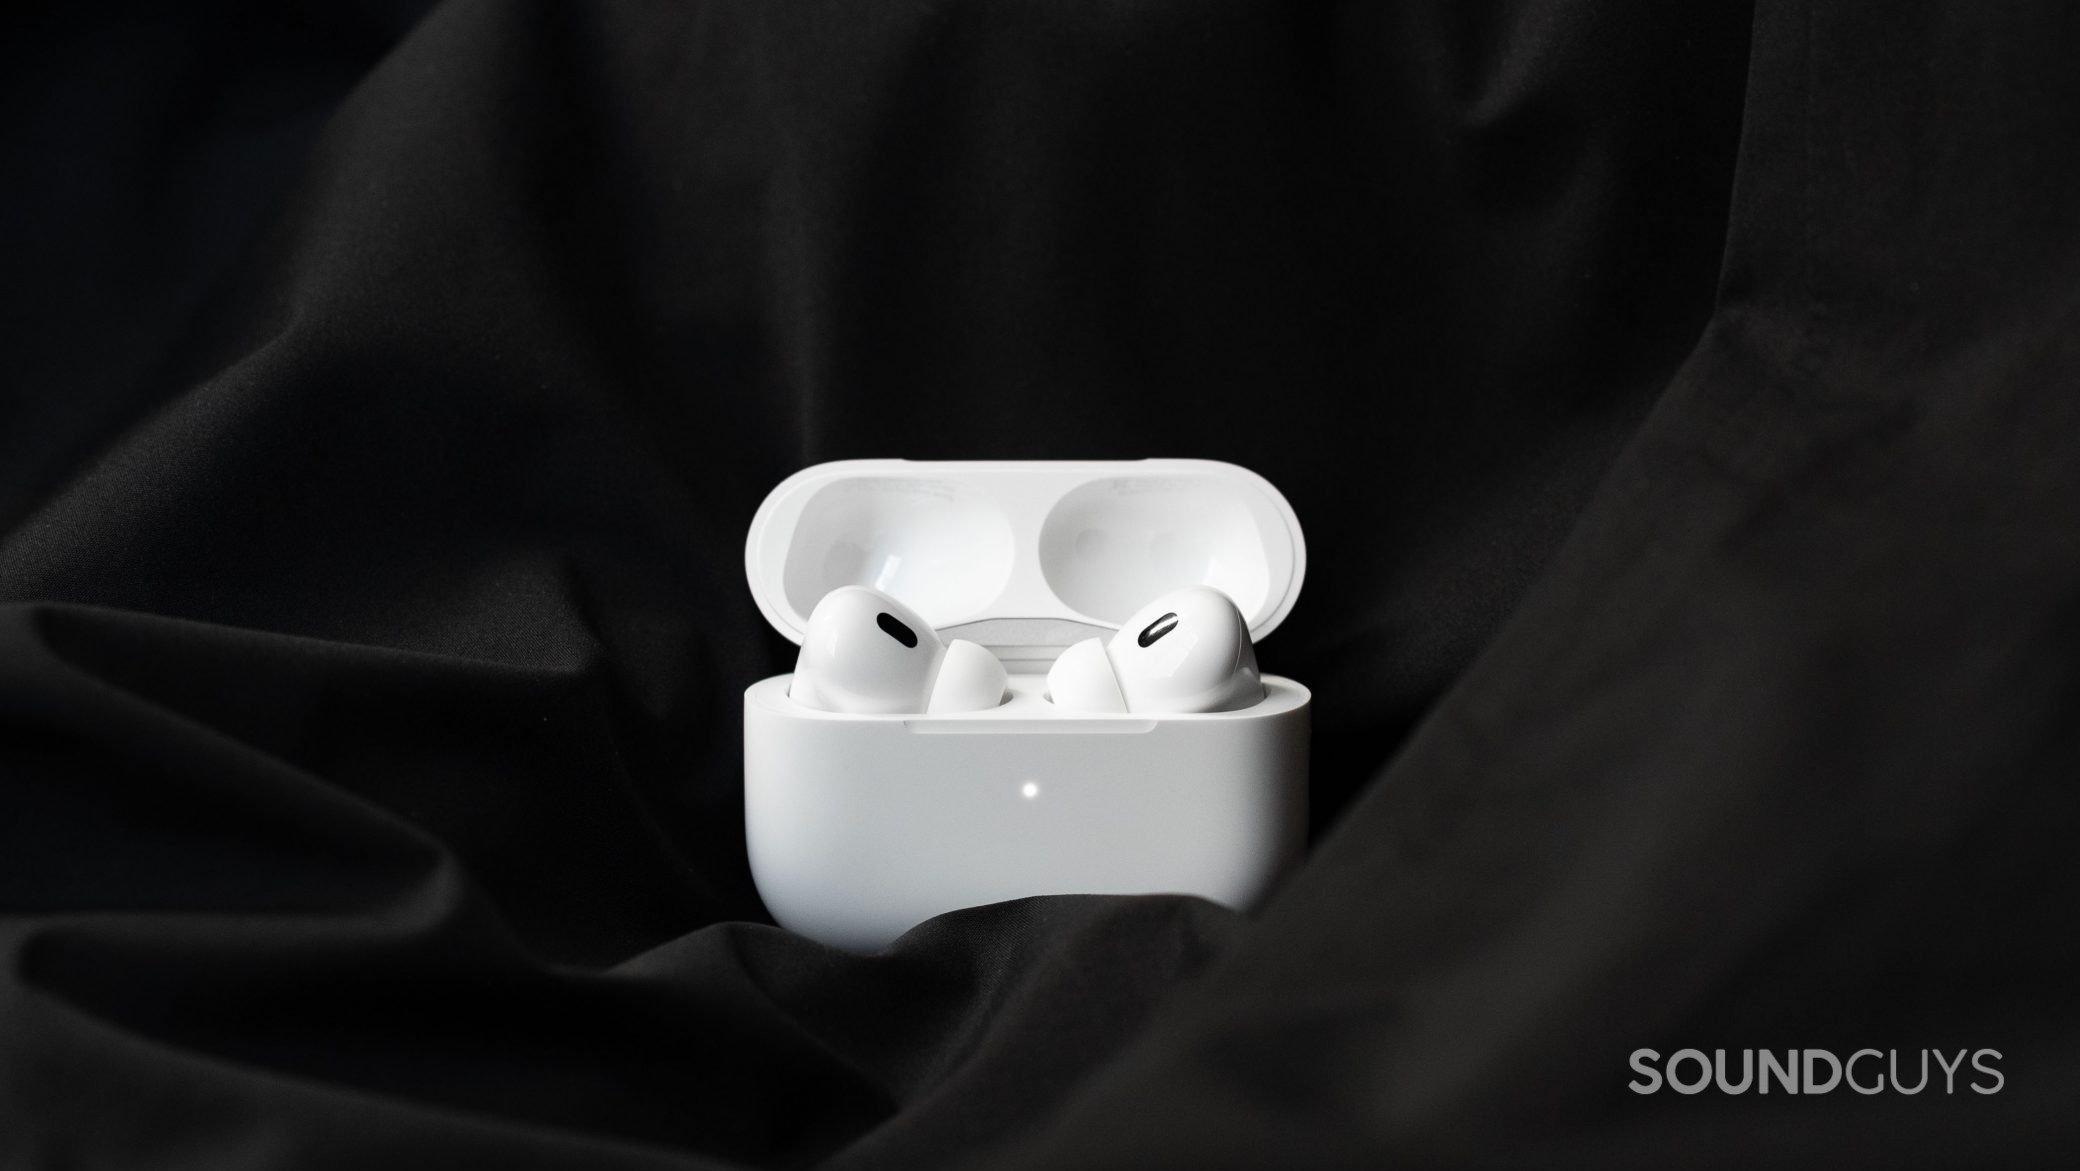 The Apple AirPods Pro (2nd generation) case is open to reveal the noise canceling wireless earbuds inside.